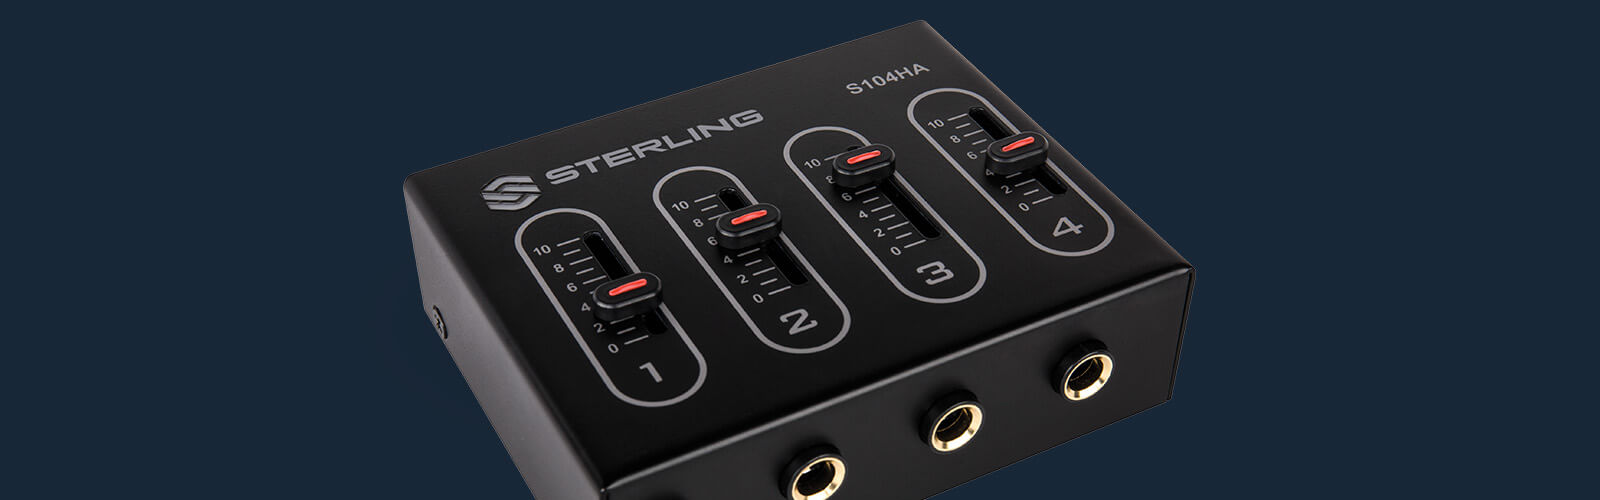 Sterling S104HA compact 4-channel headphone amplifier right on blue background close up.